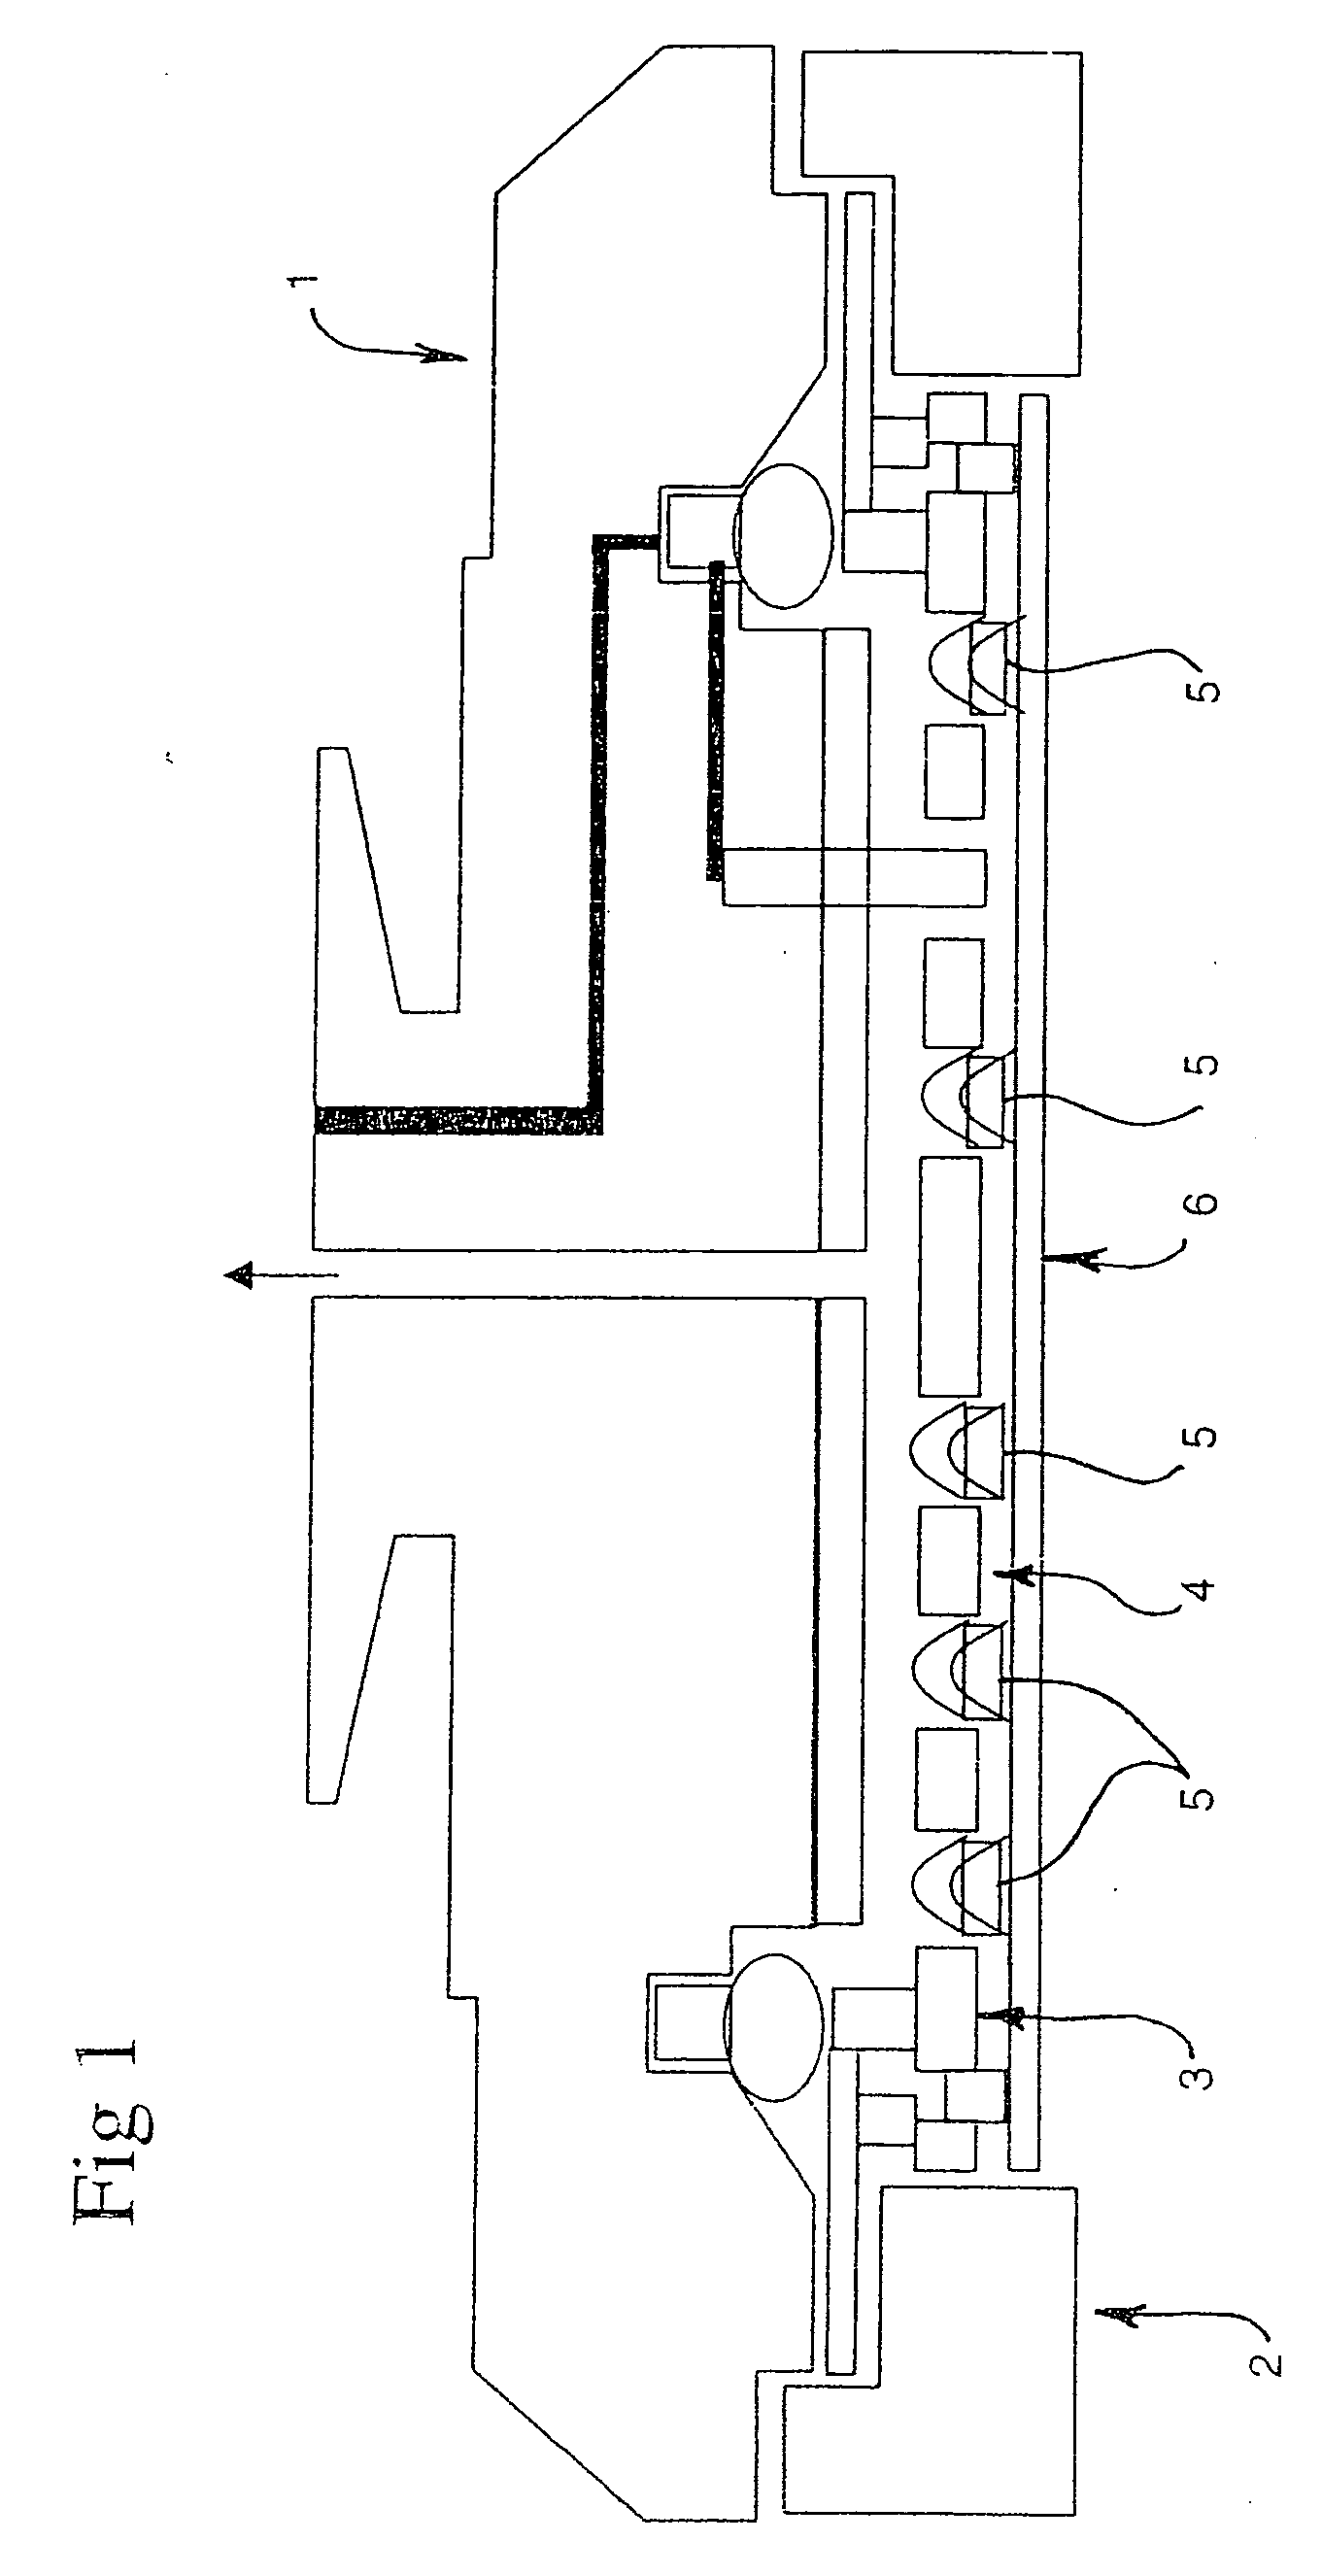 Process for producing improved membranes